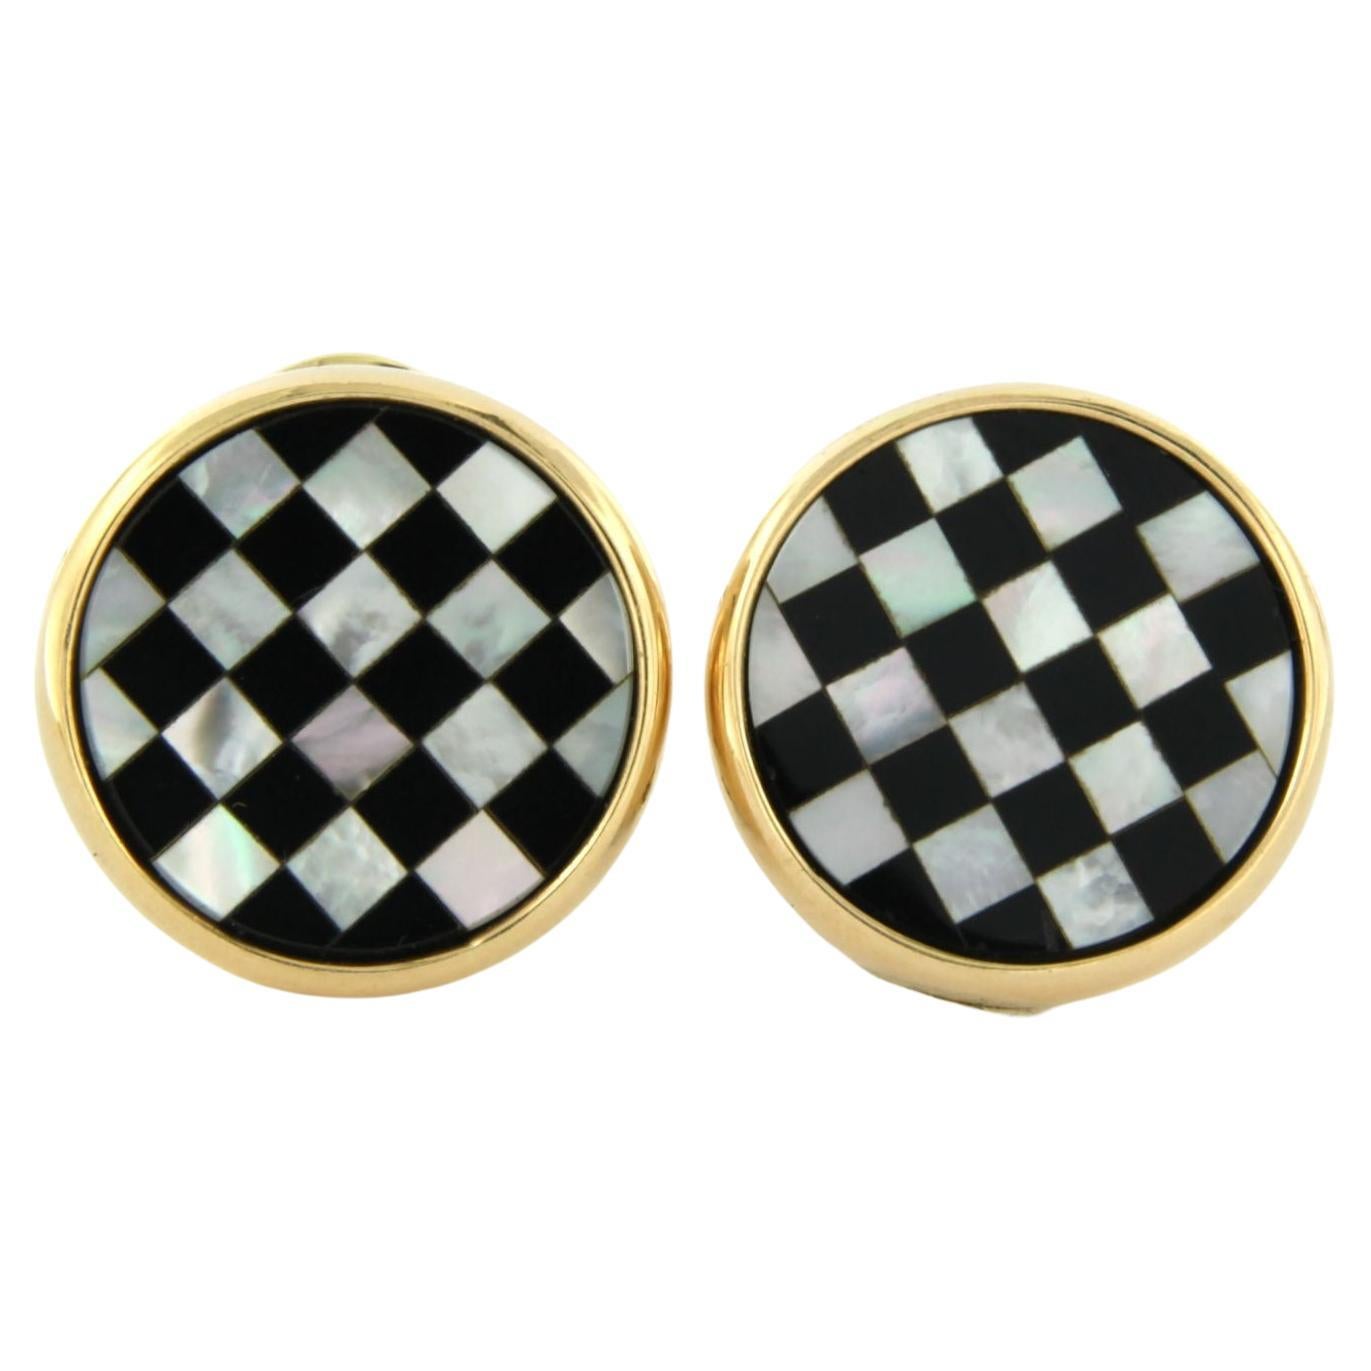 Earrings set with onyx and mother-of-pearl 14k yellow gold